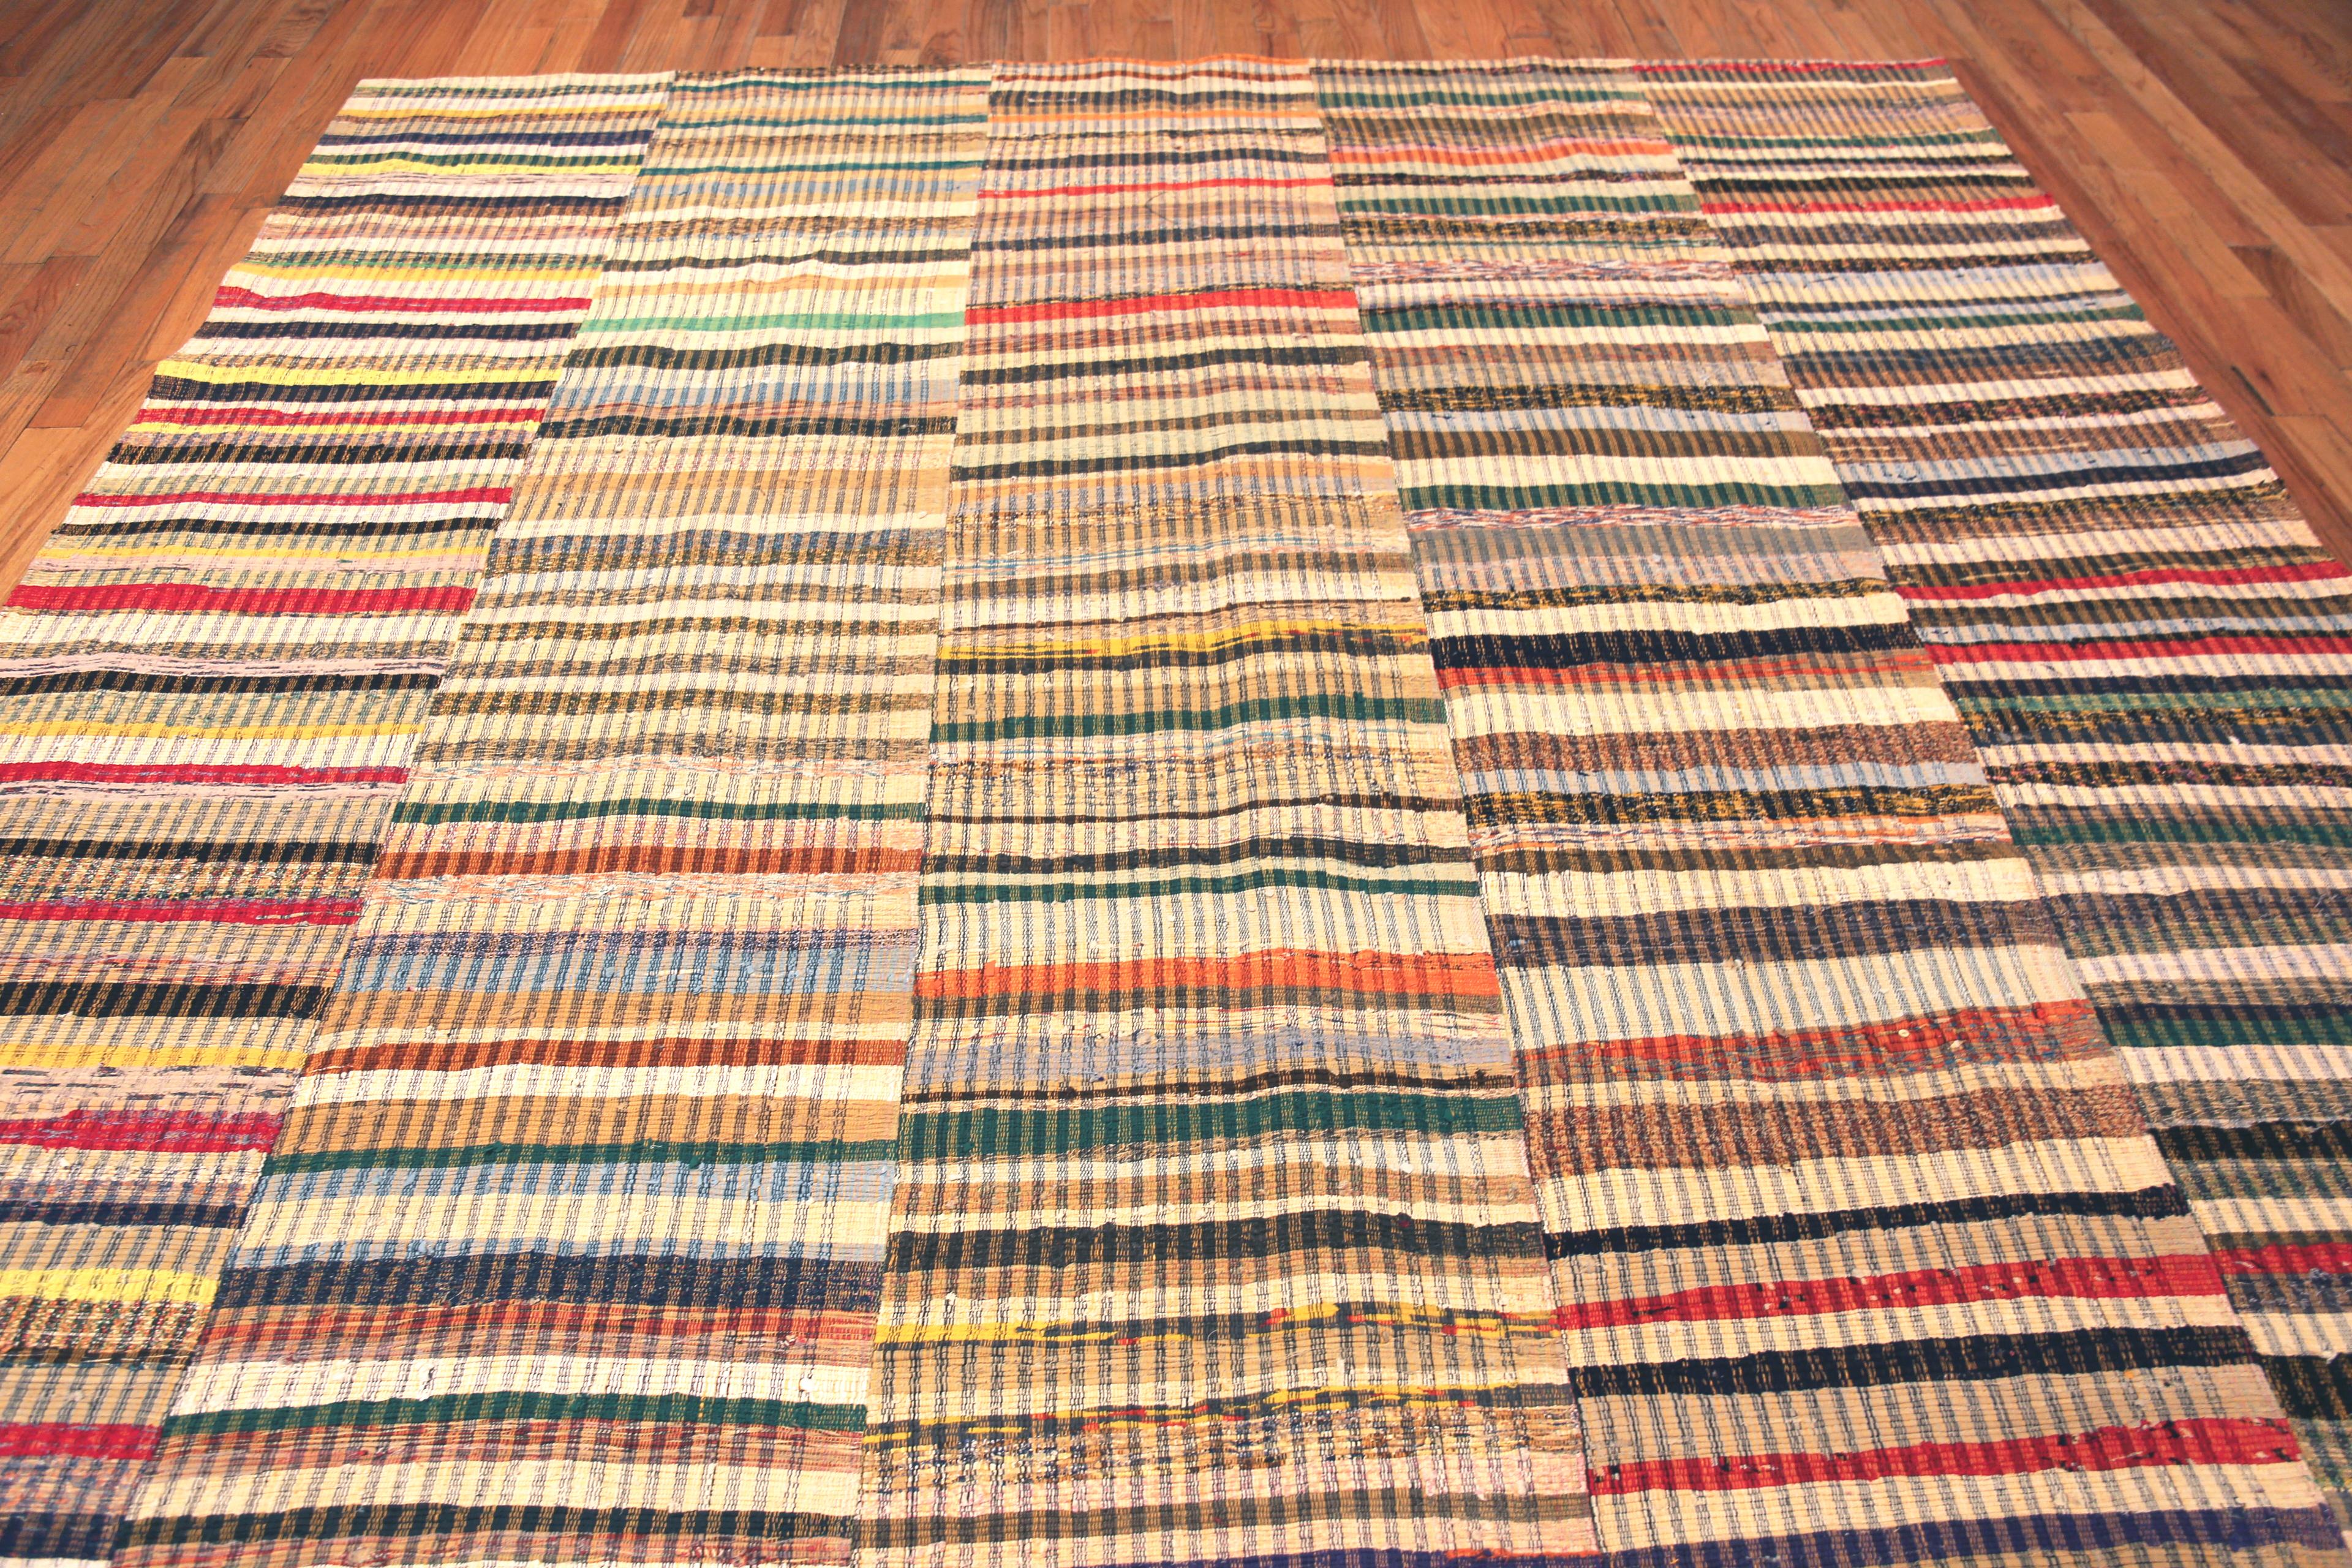 Hand-Woven Nazmiyal Collection Colorful Modern Rag Rug. 10 ft x 12 ft 10 in